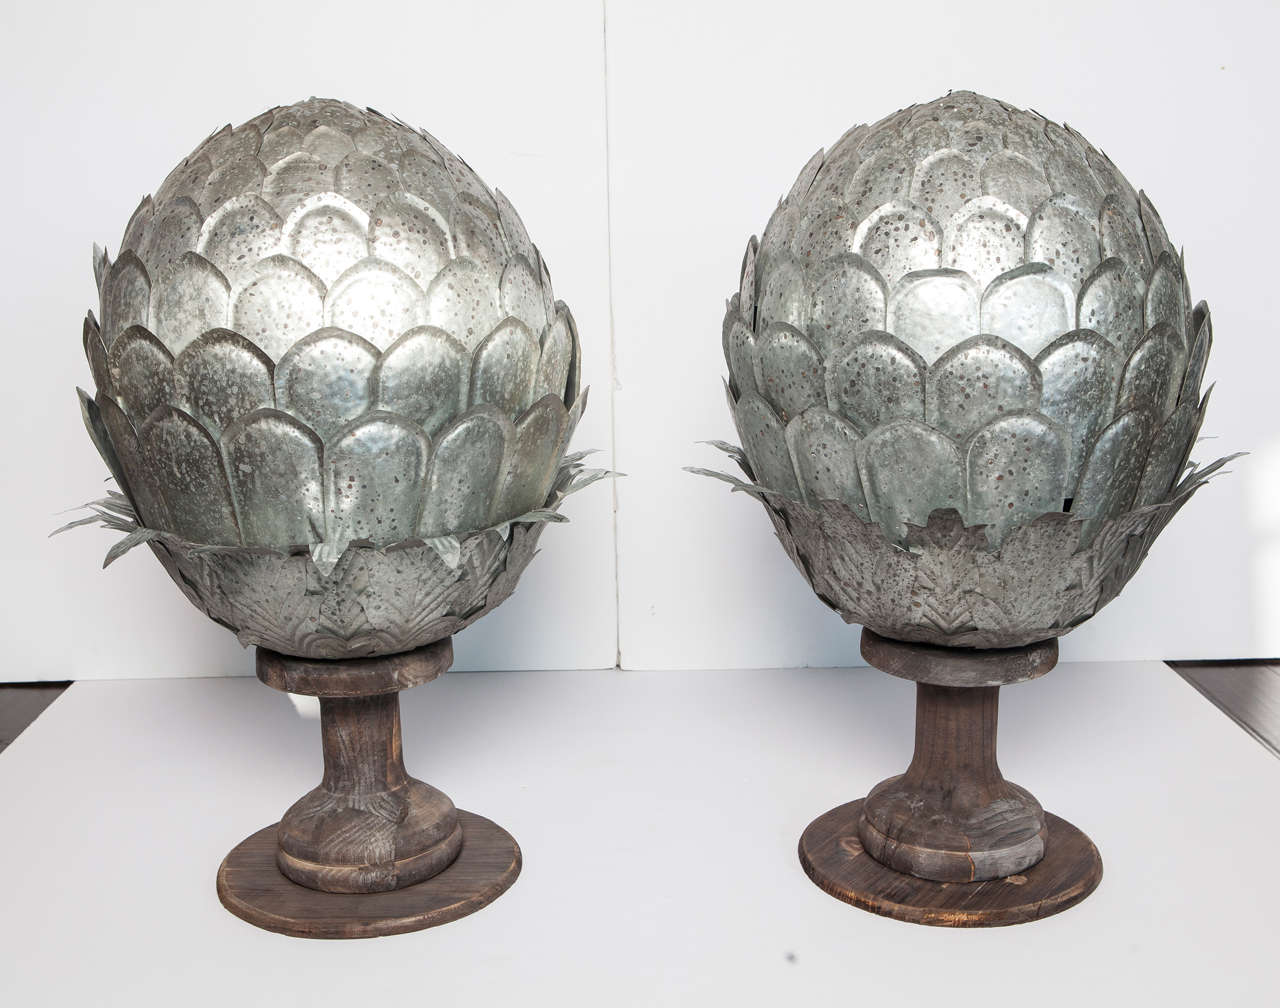 Galvanized metal and wood artichokes on wood base. Each artichoke consists of two separate pieces.